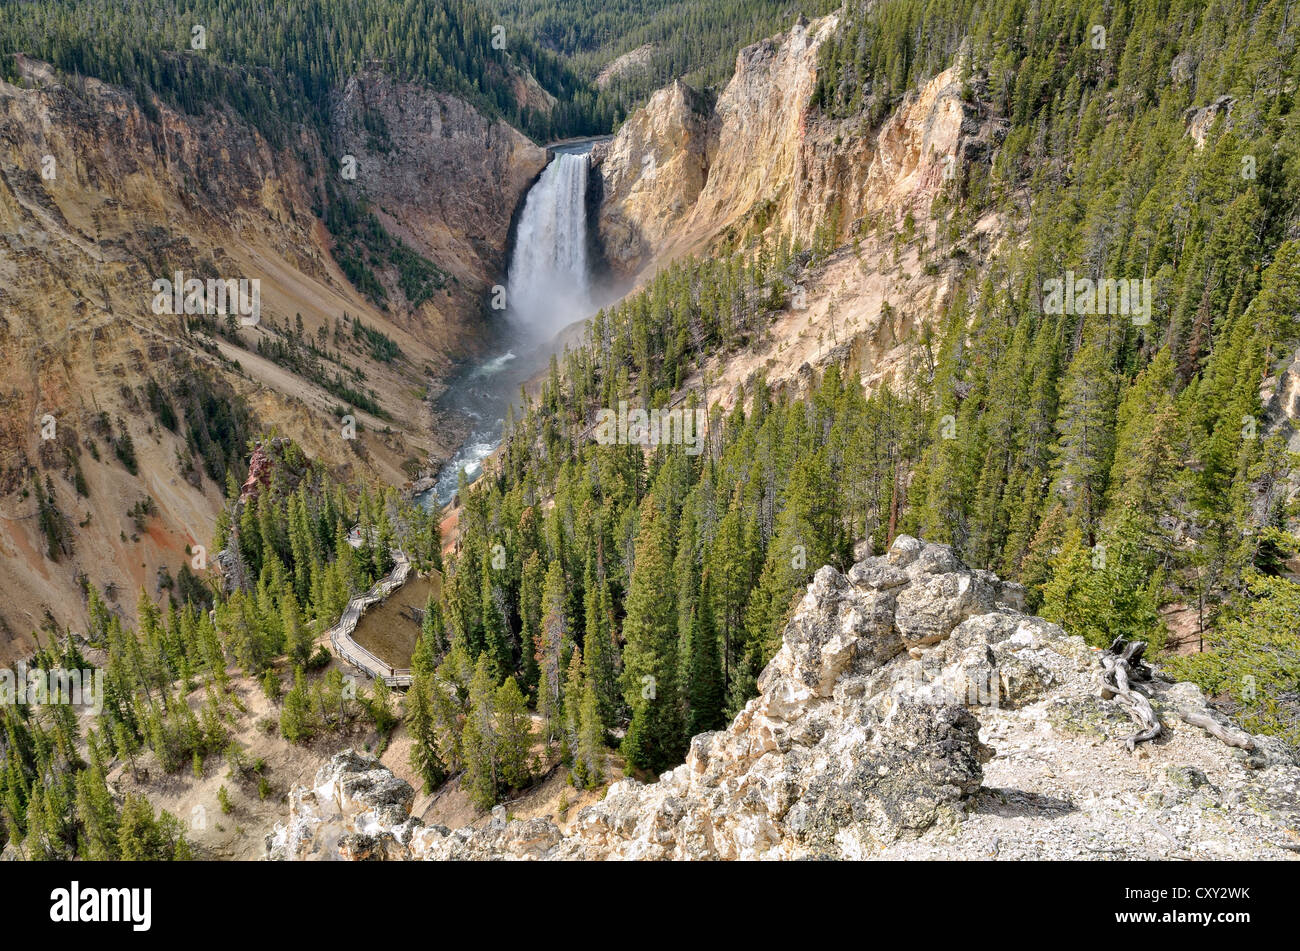 Lower Falls with the Red Rock Trail, Grand Canyon of the Yellowstone River, view from North Rim, Yellowstone National Park Stock Photo